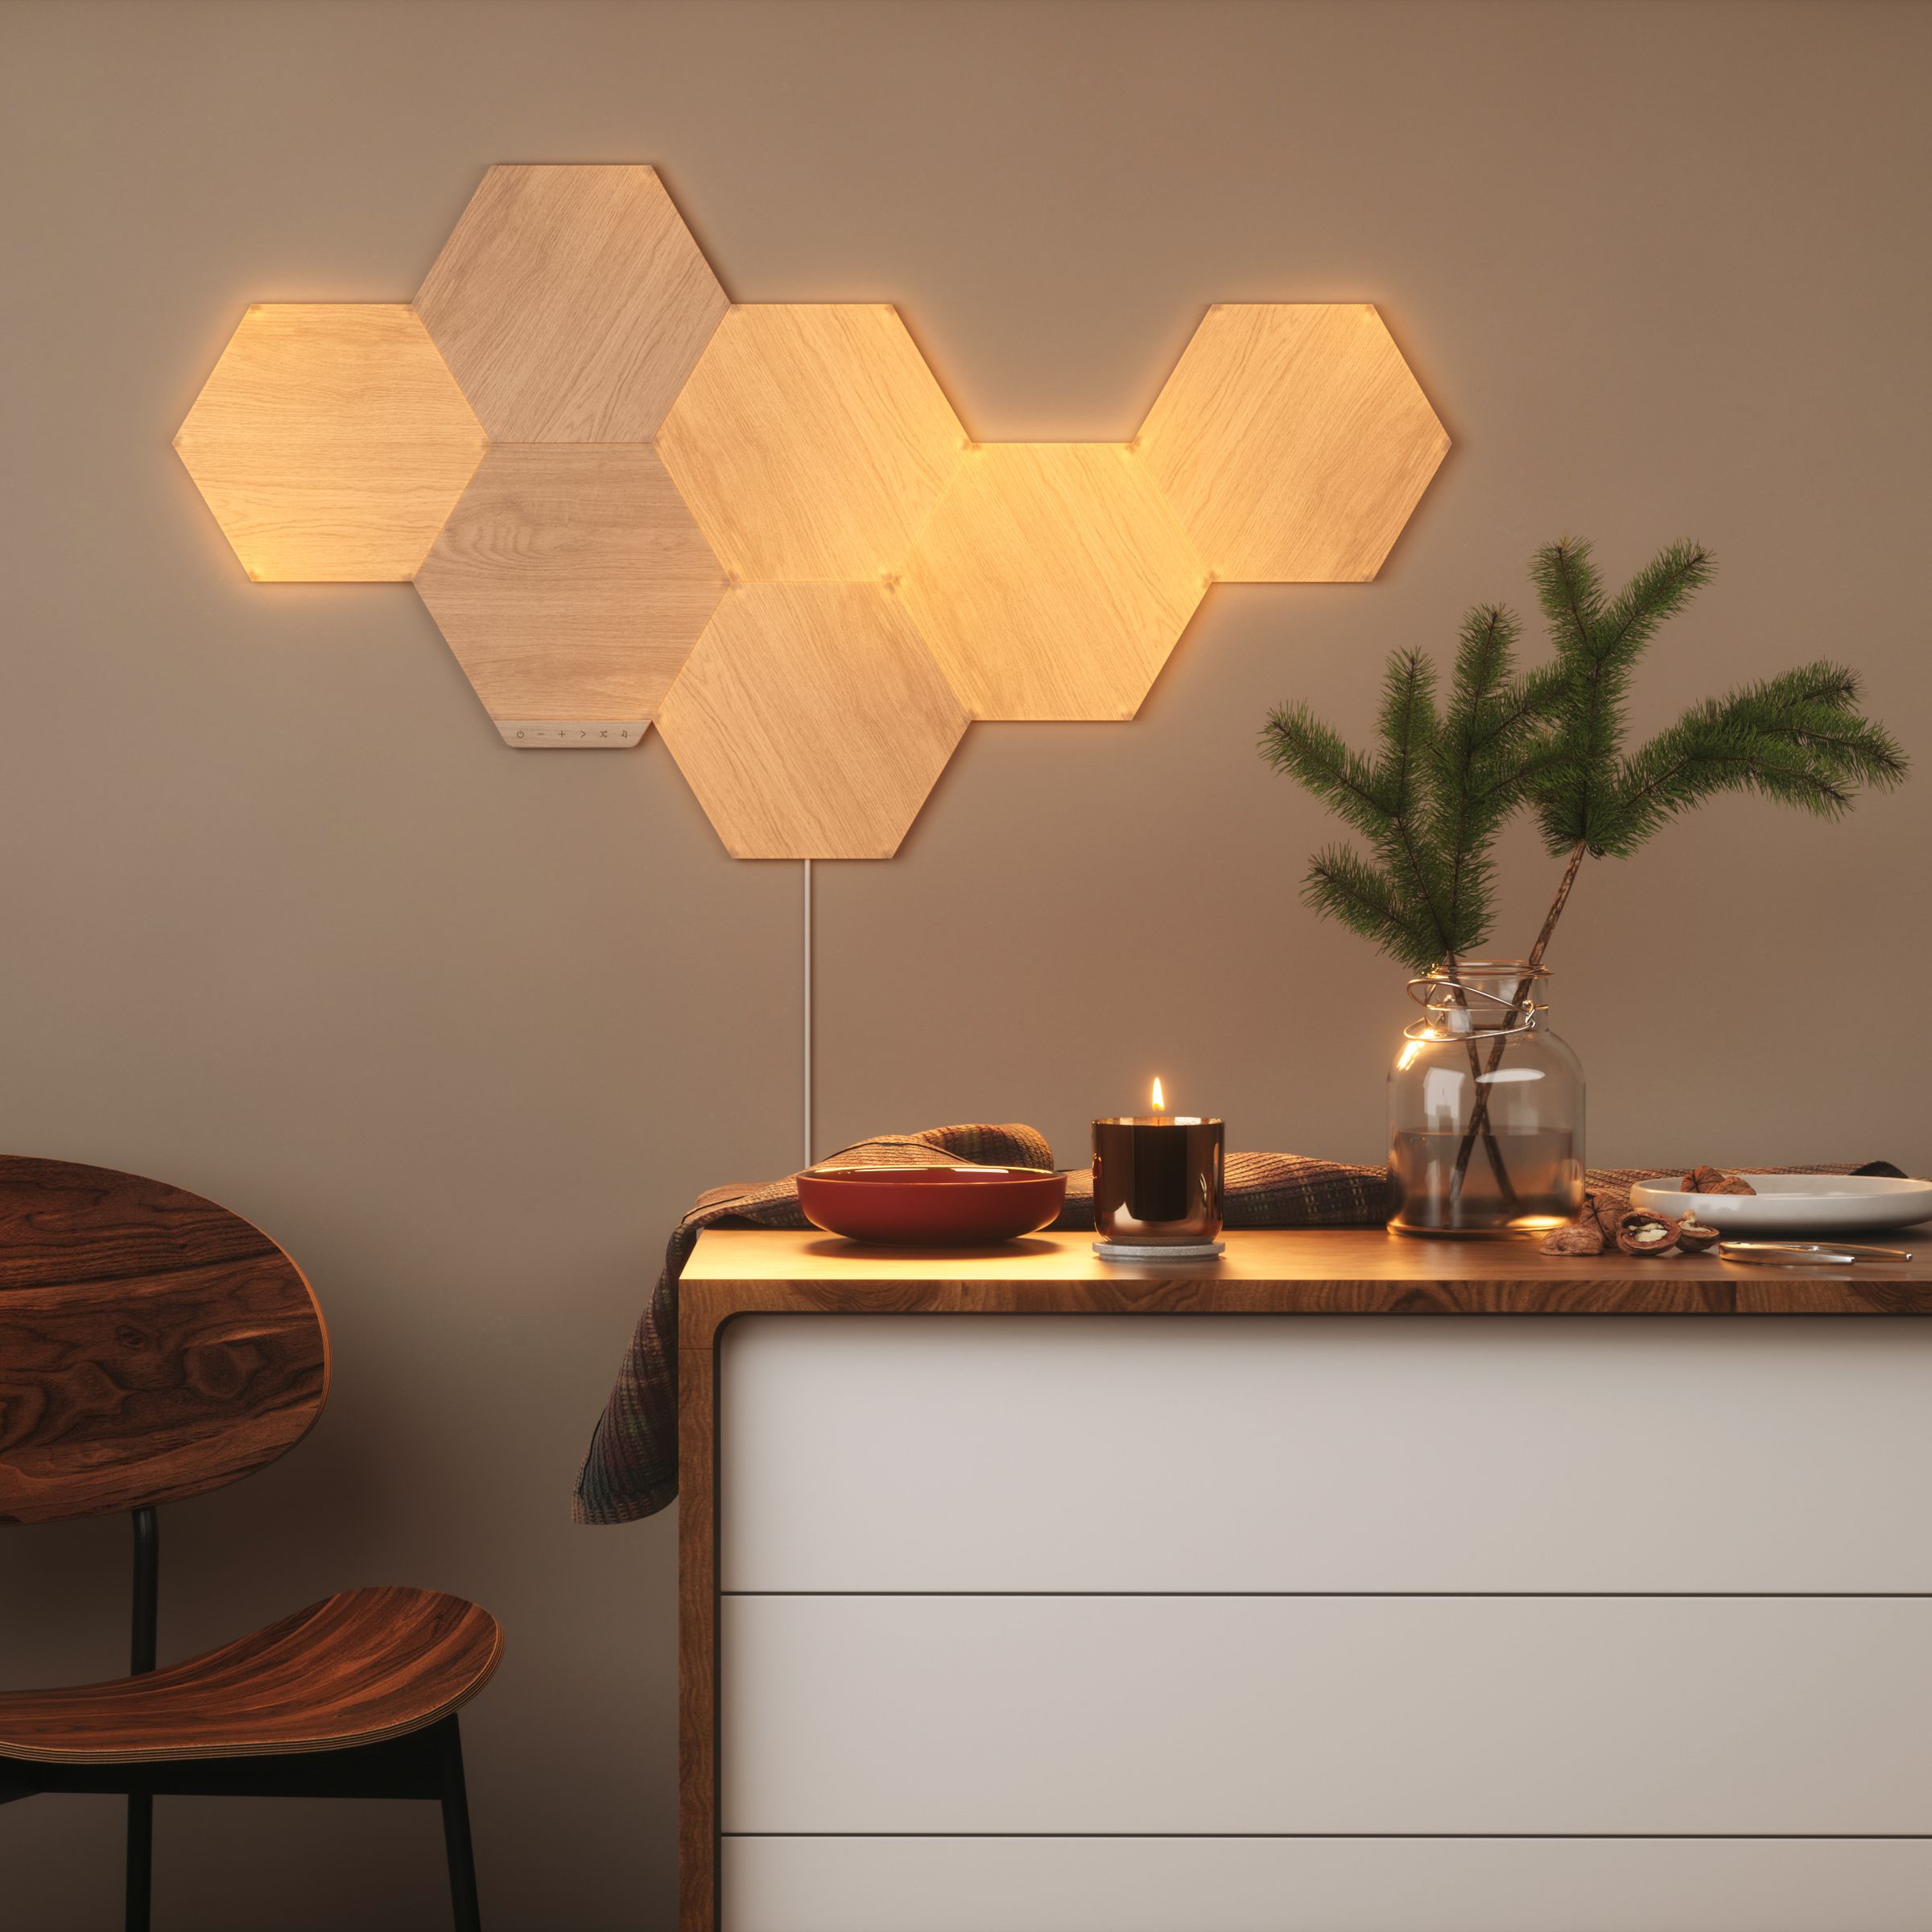 The Nanoleaf Elements offer some unique decor, whether illuminated or not.